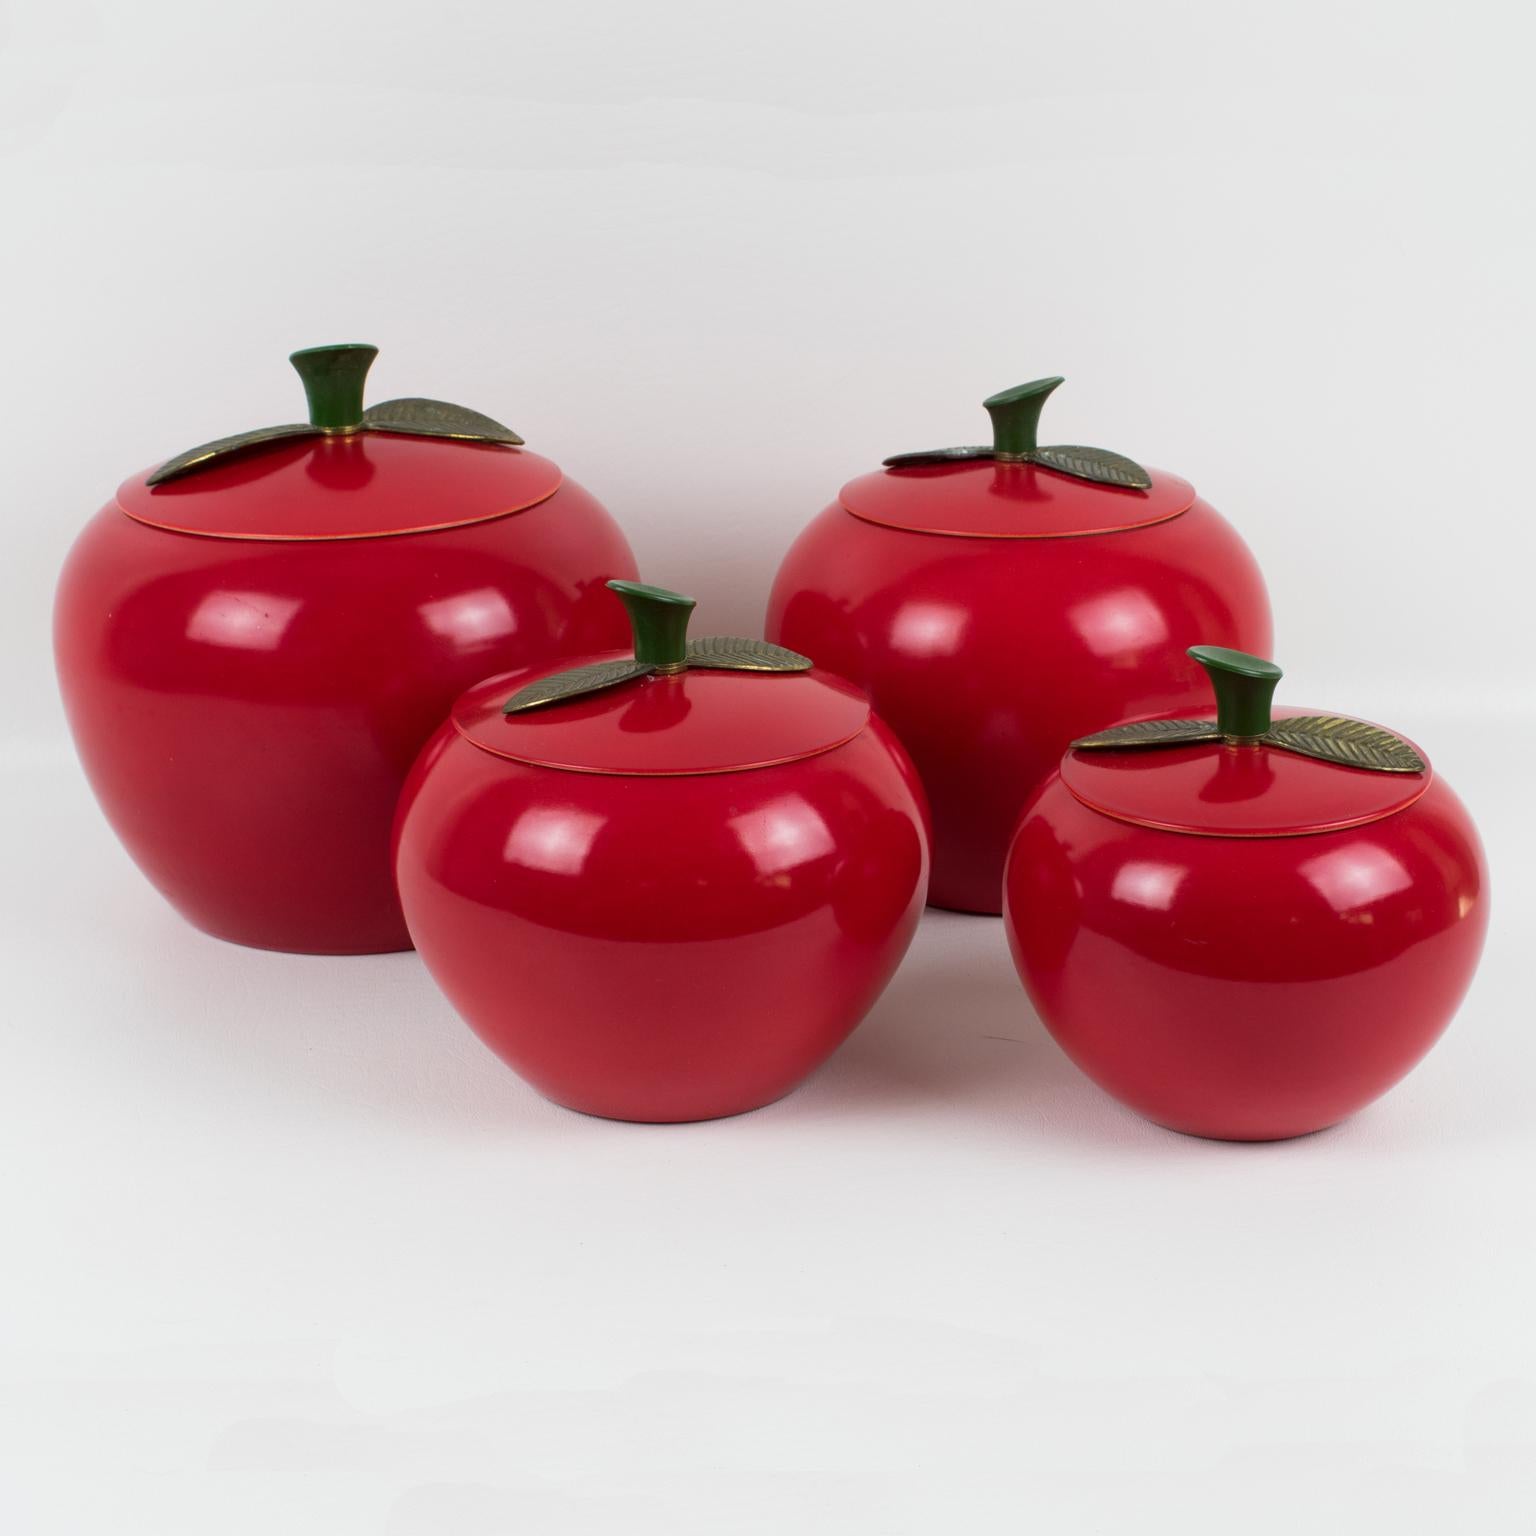 Those cute Mid-Century-Modern 1960s kitchen canister or cookie jar set features an apple-shaped container in red enamel aluminum in assorted graduated sizes. You have four pieces in this set. The containers are adorned with a stem in hard green